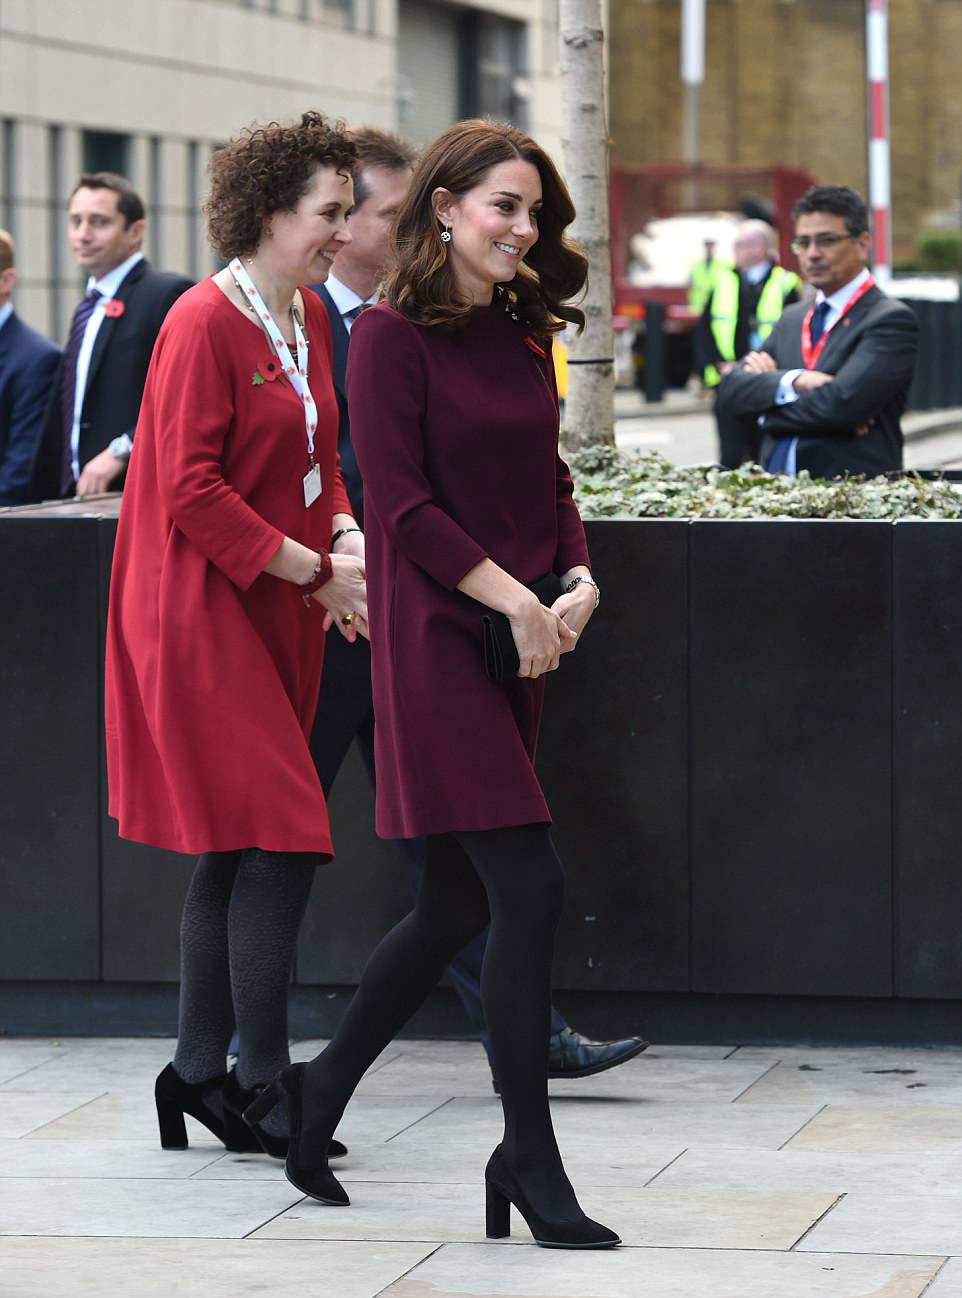 Royal Family Around the World: The Duchess Of Cambridge Attends ...